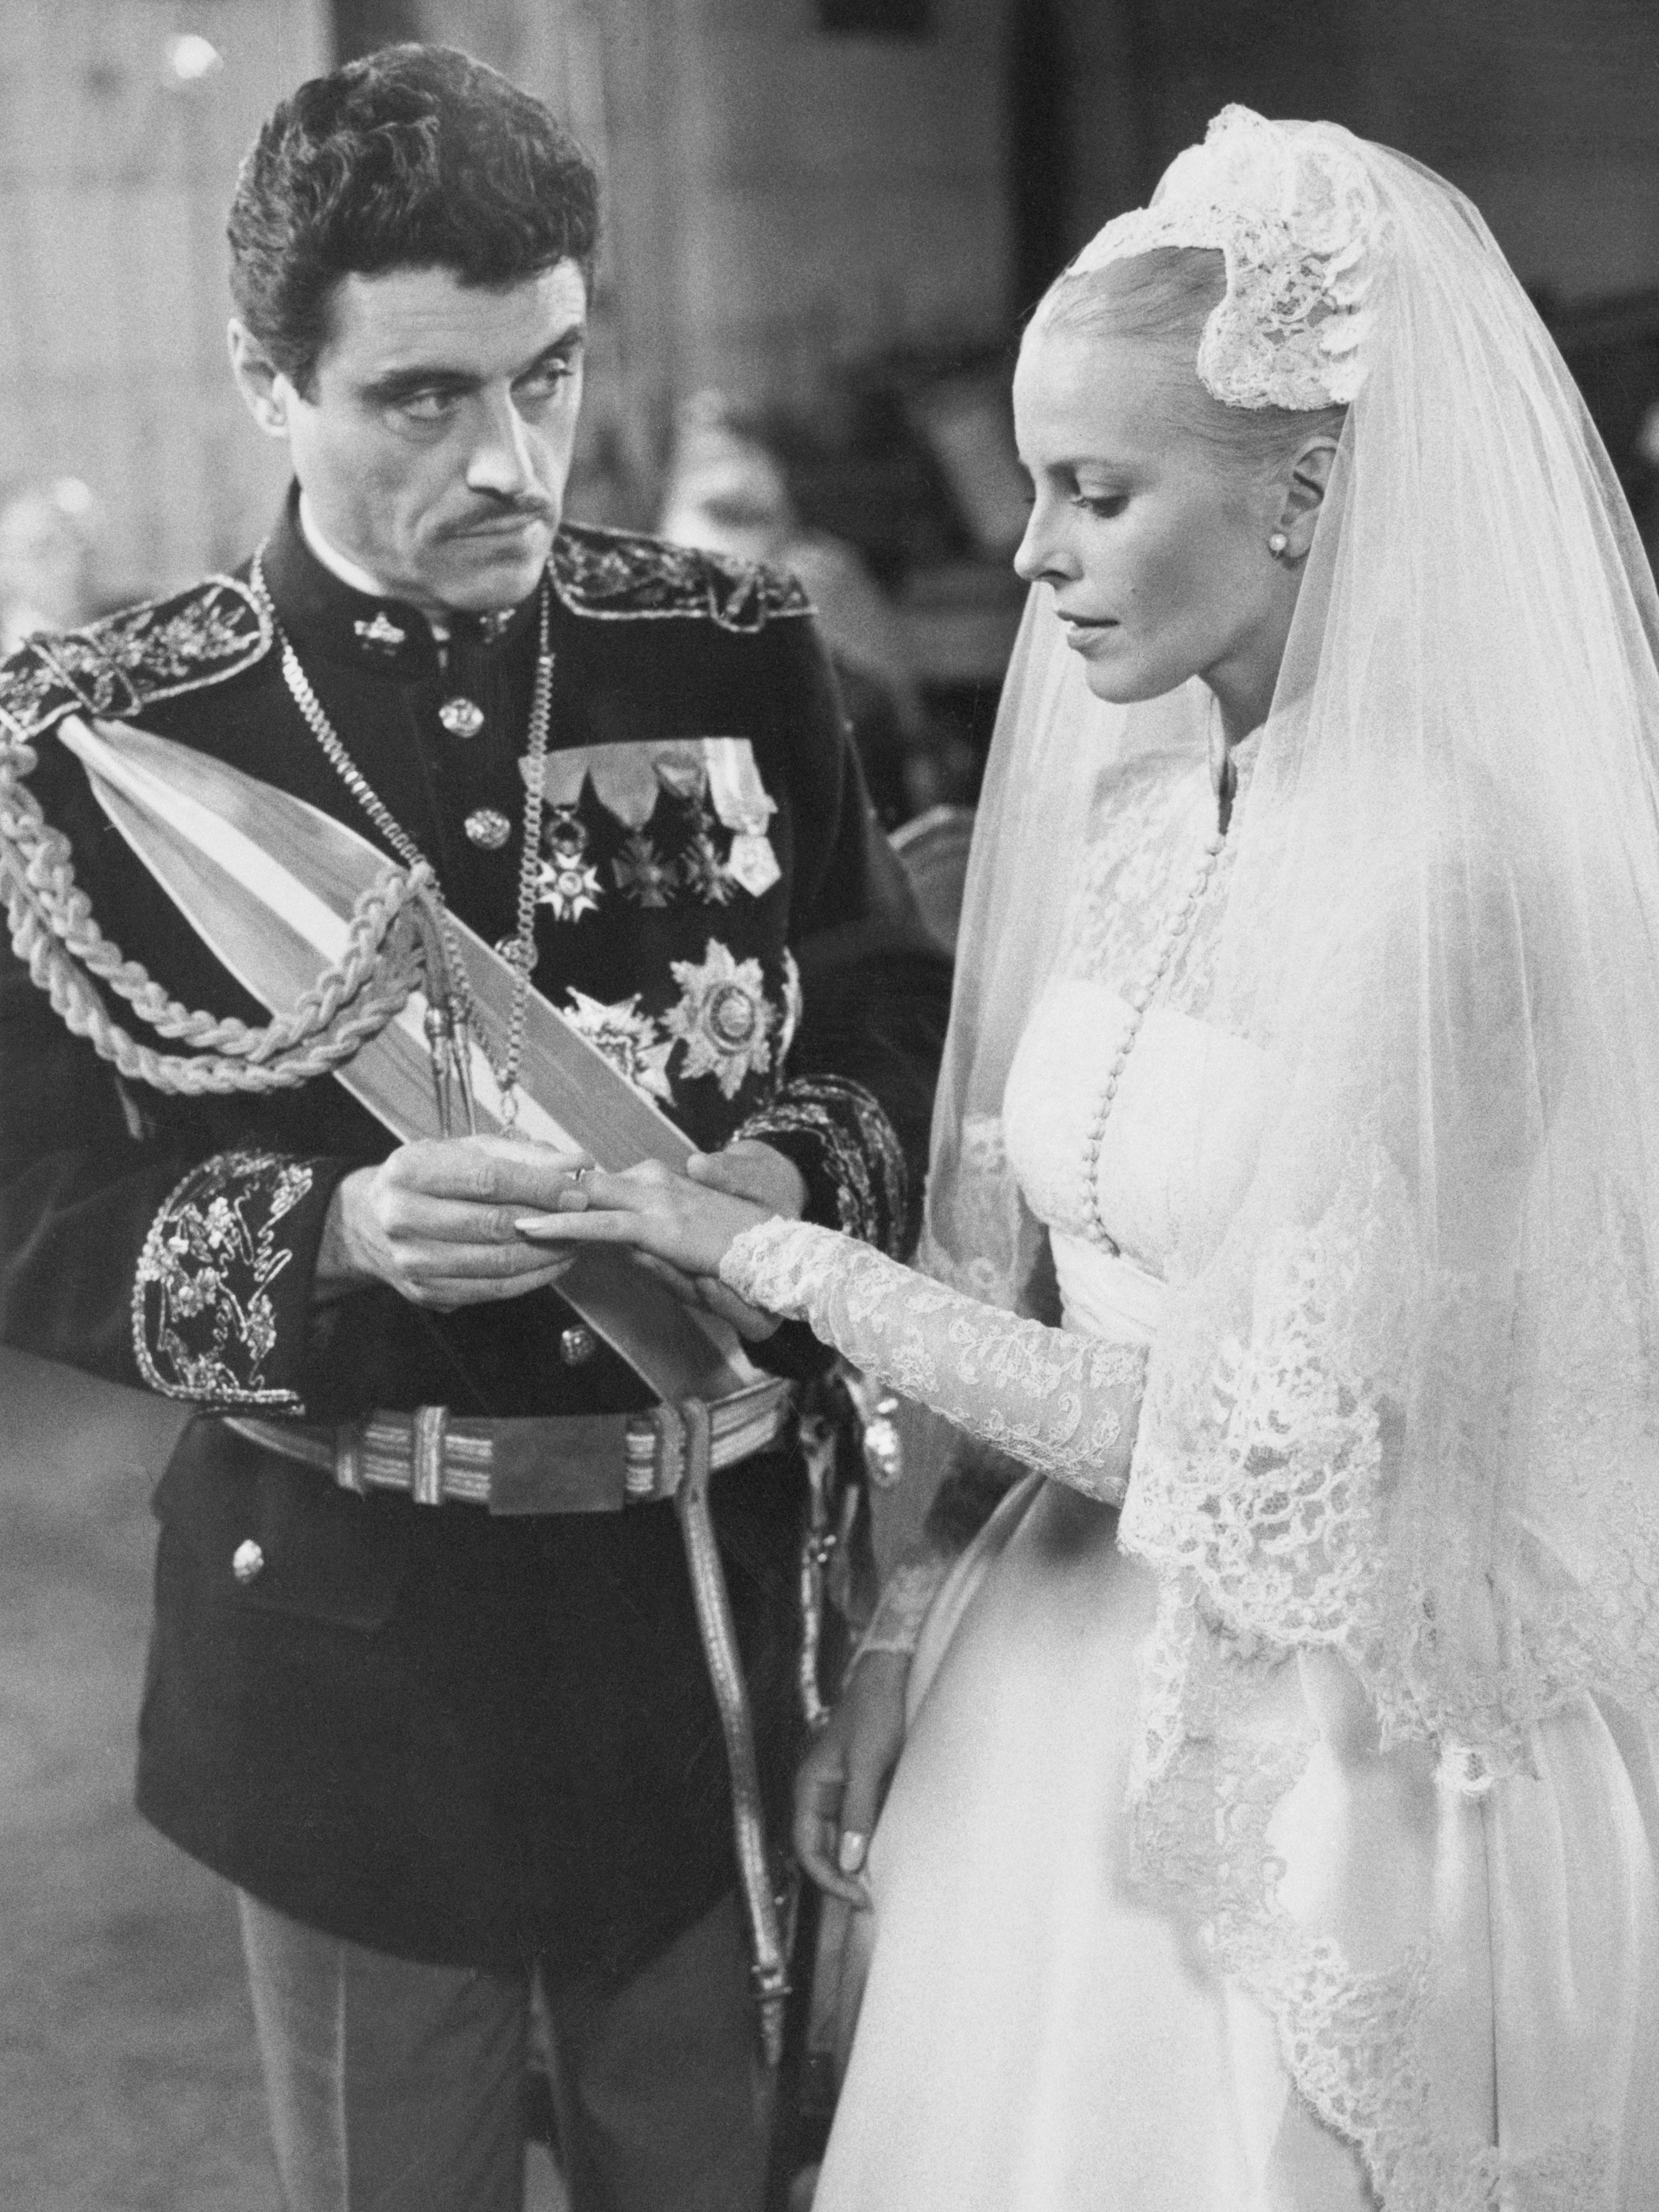 Cheryl Ladd and Ian McShane star in the 1983 movie "The Grace Kelly Story"